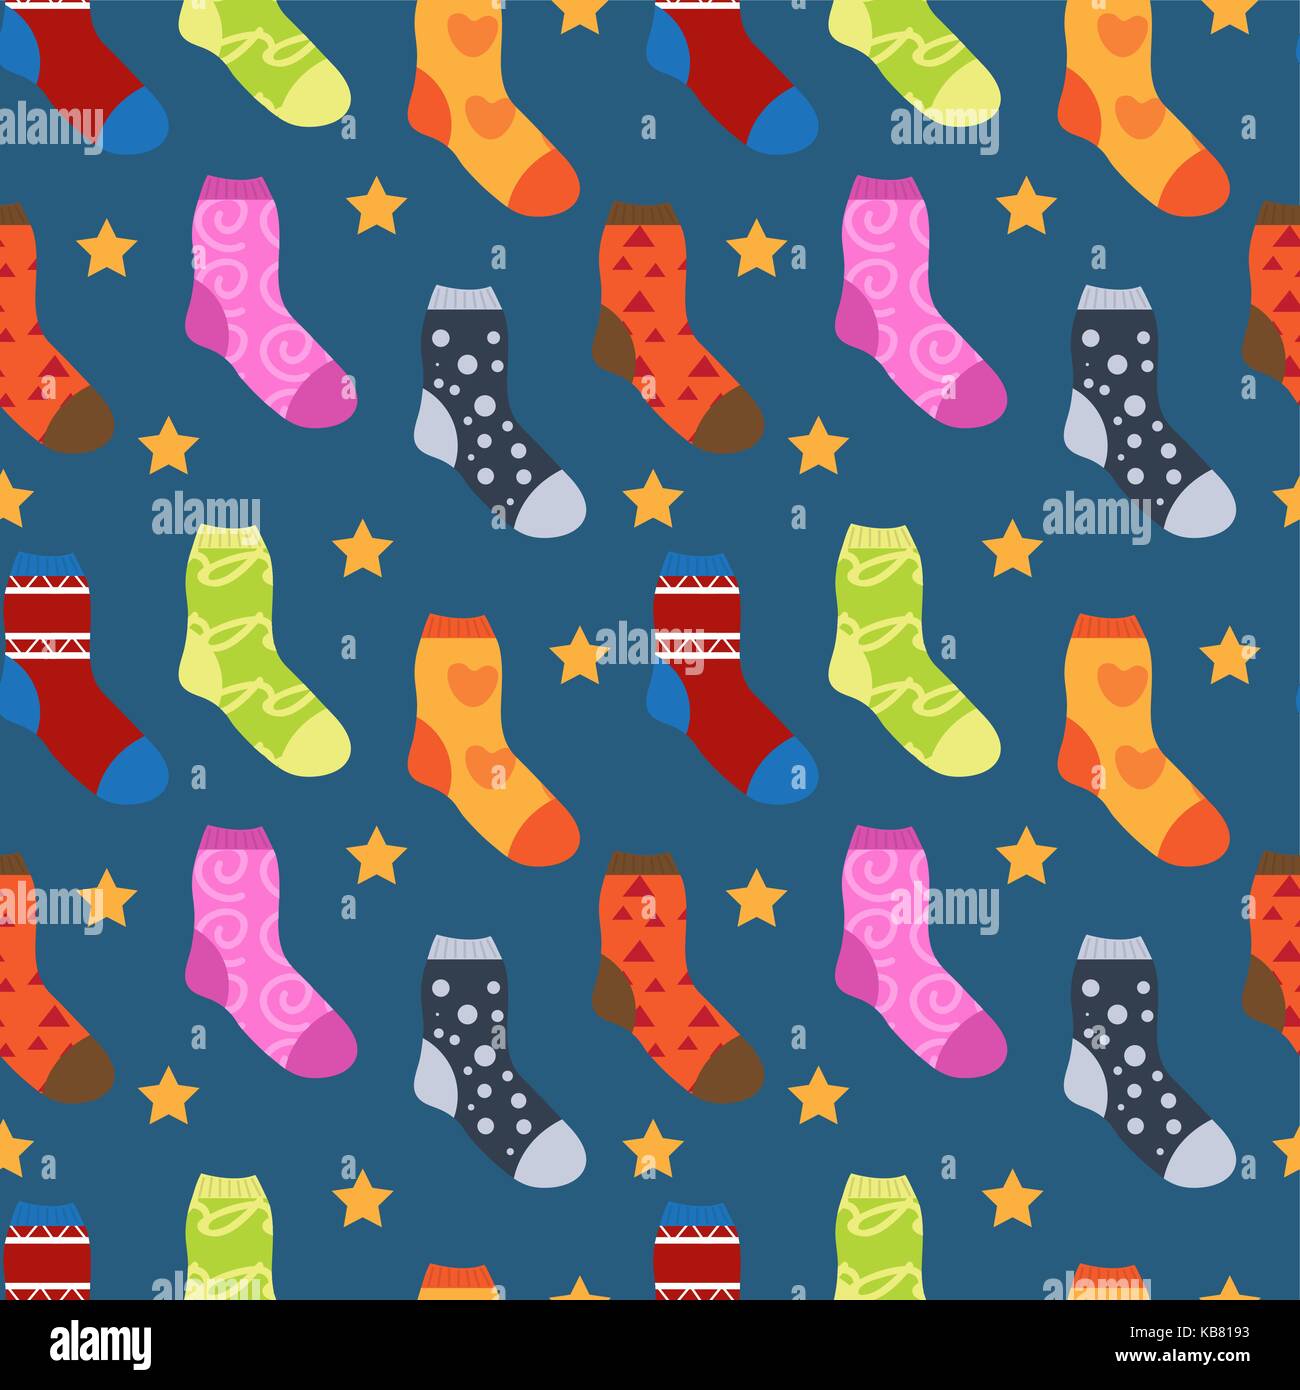 Winter socks with different prints seamless pattern. Christmas sock repeating texture. Endless background. Vector illustration. Stock Vector